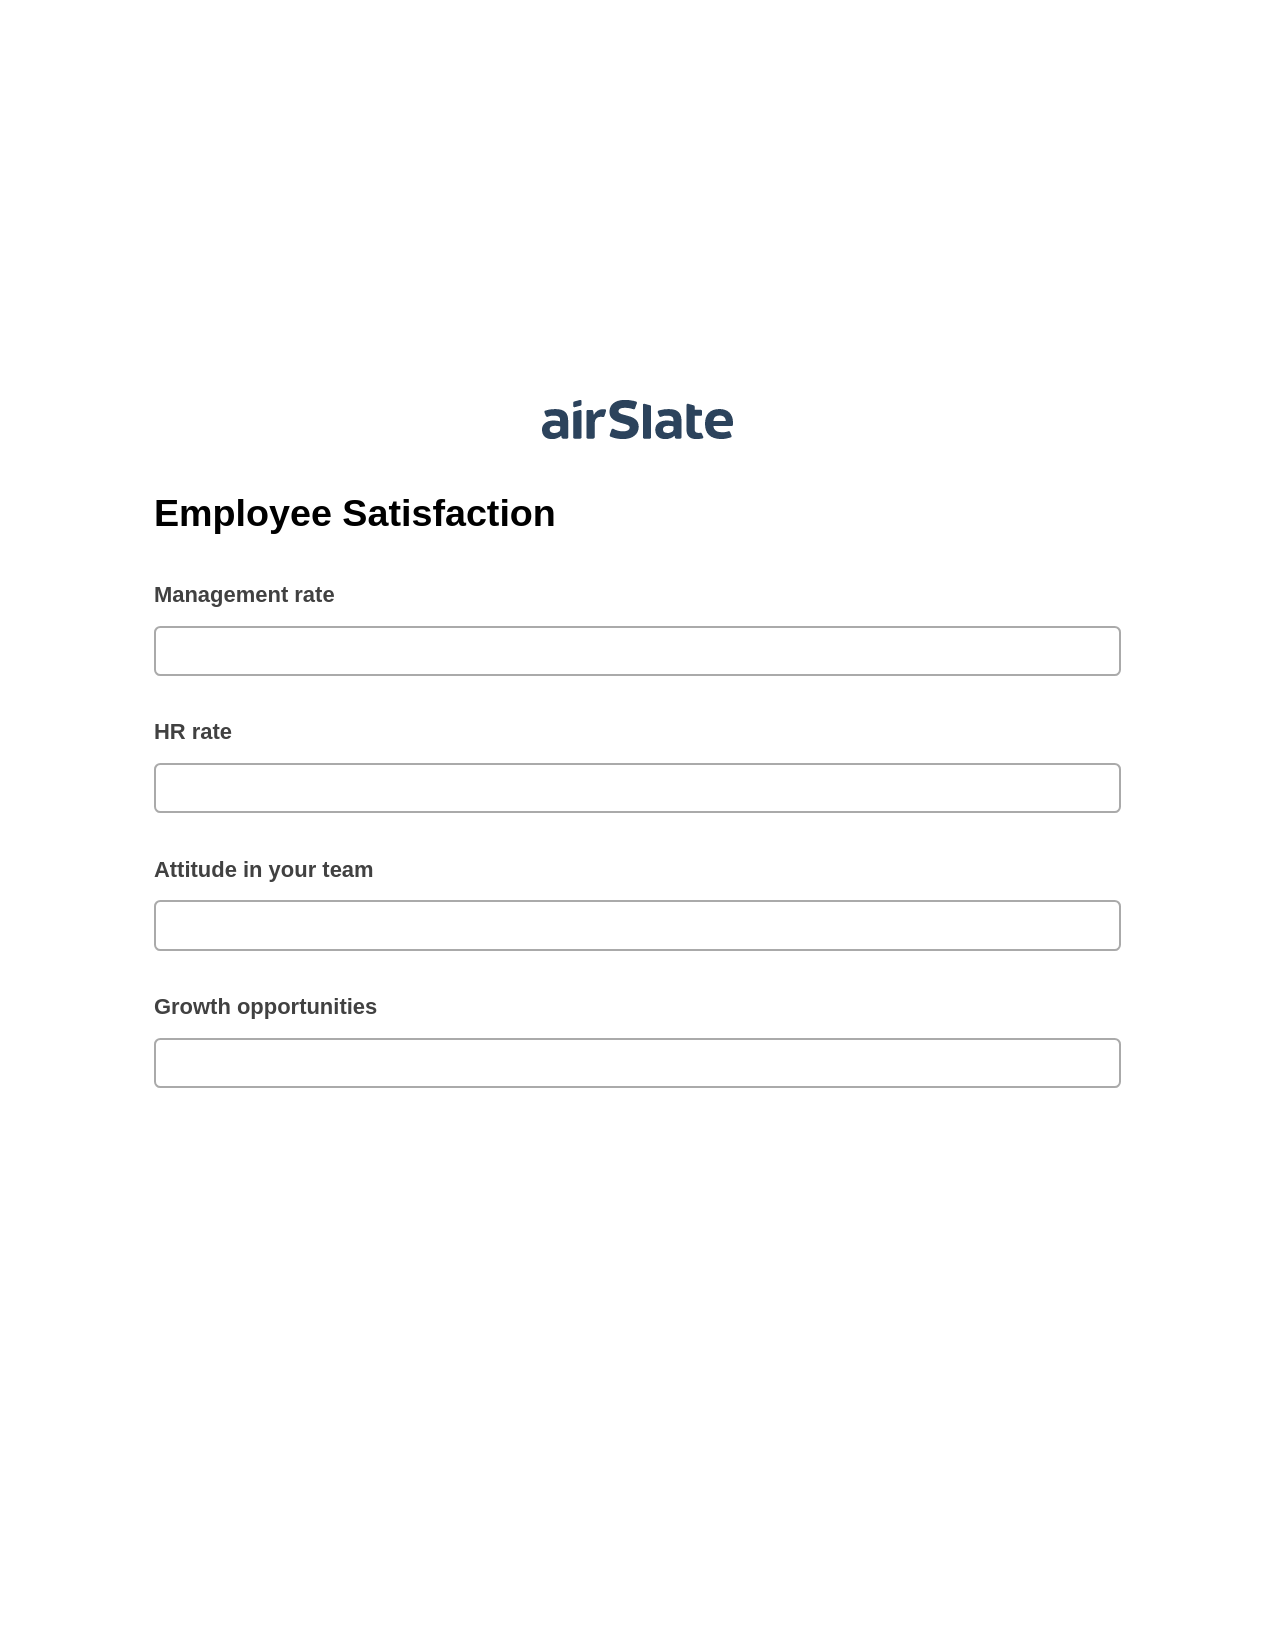 Employee Satisfaction Pre-fill from Google Sheets Bot, Unassign Role Bot, Archive to SharePoint Folder Bot